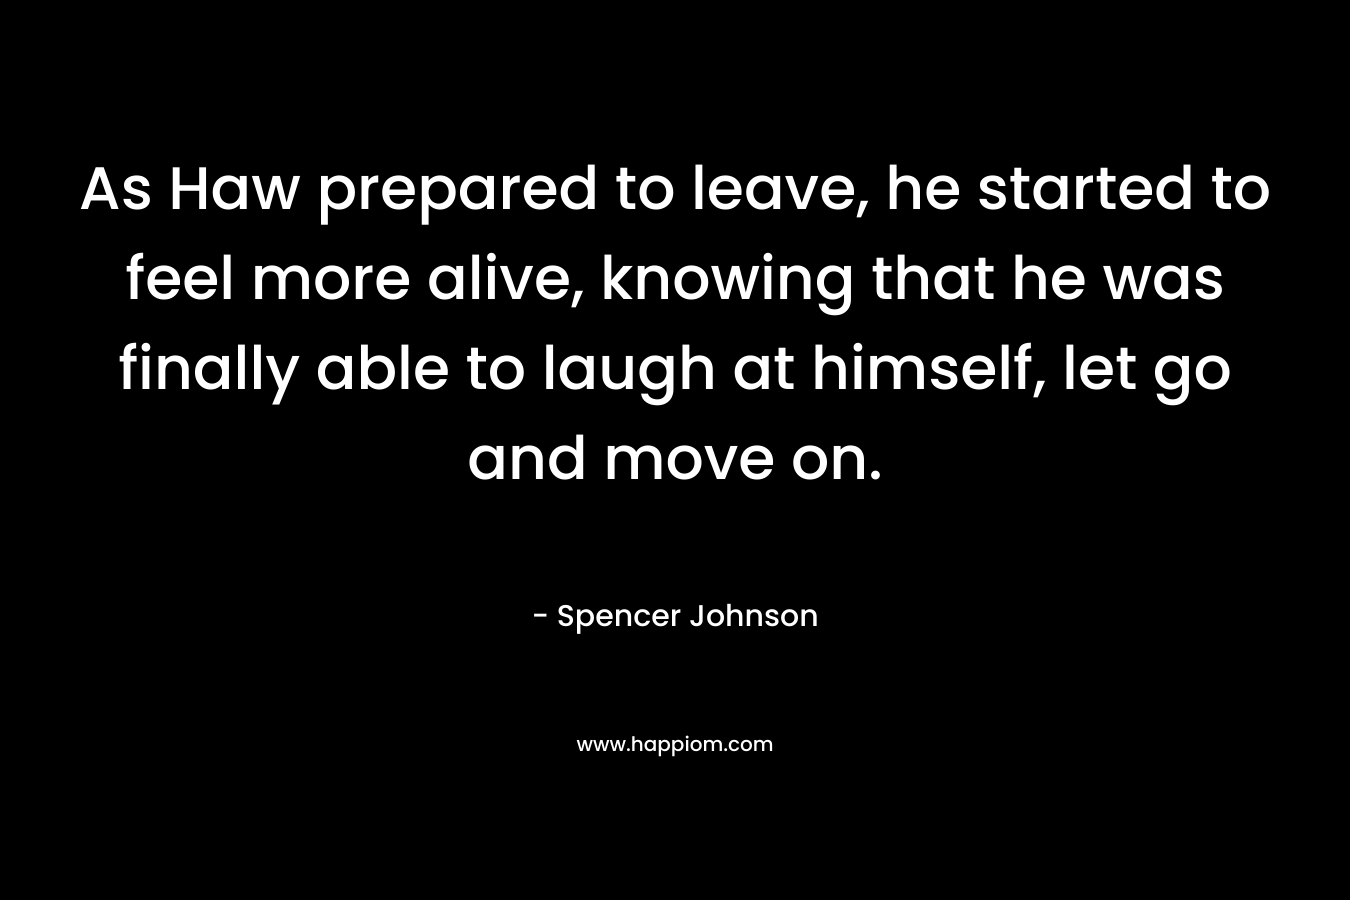 As Haw prepared to leave, he started to feel more alive, knowing that he was finally able to laugh at himself, let go and move on. – Spencer Johnson